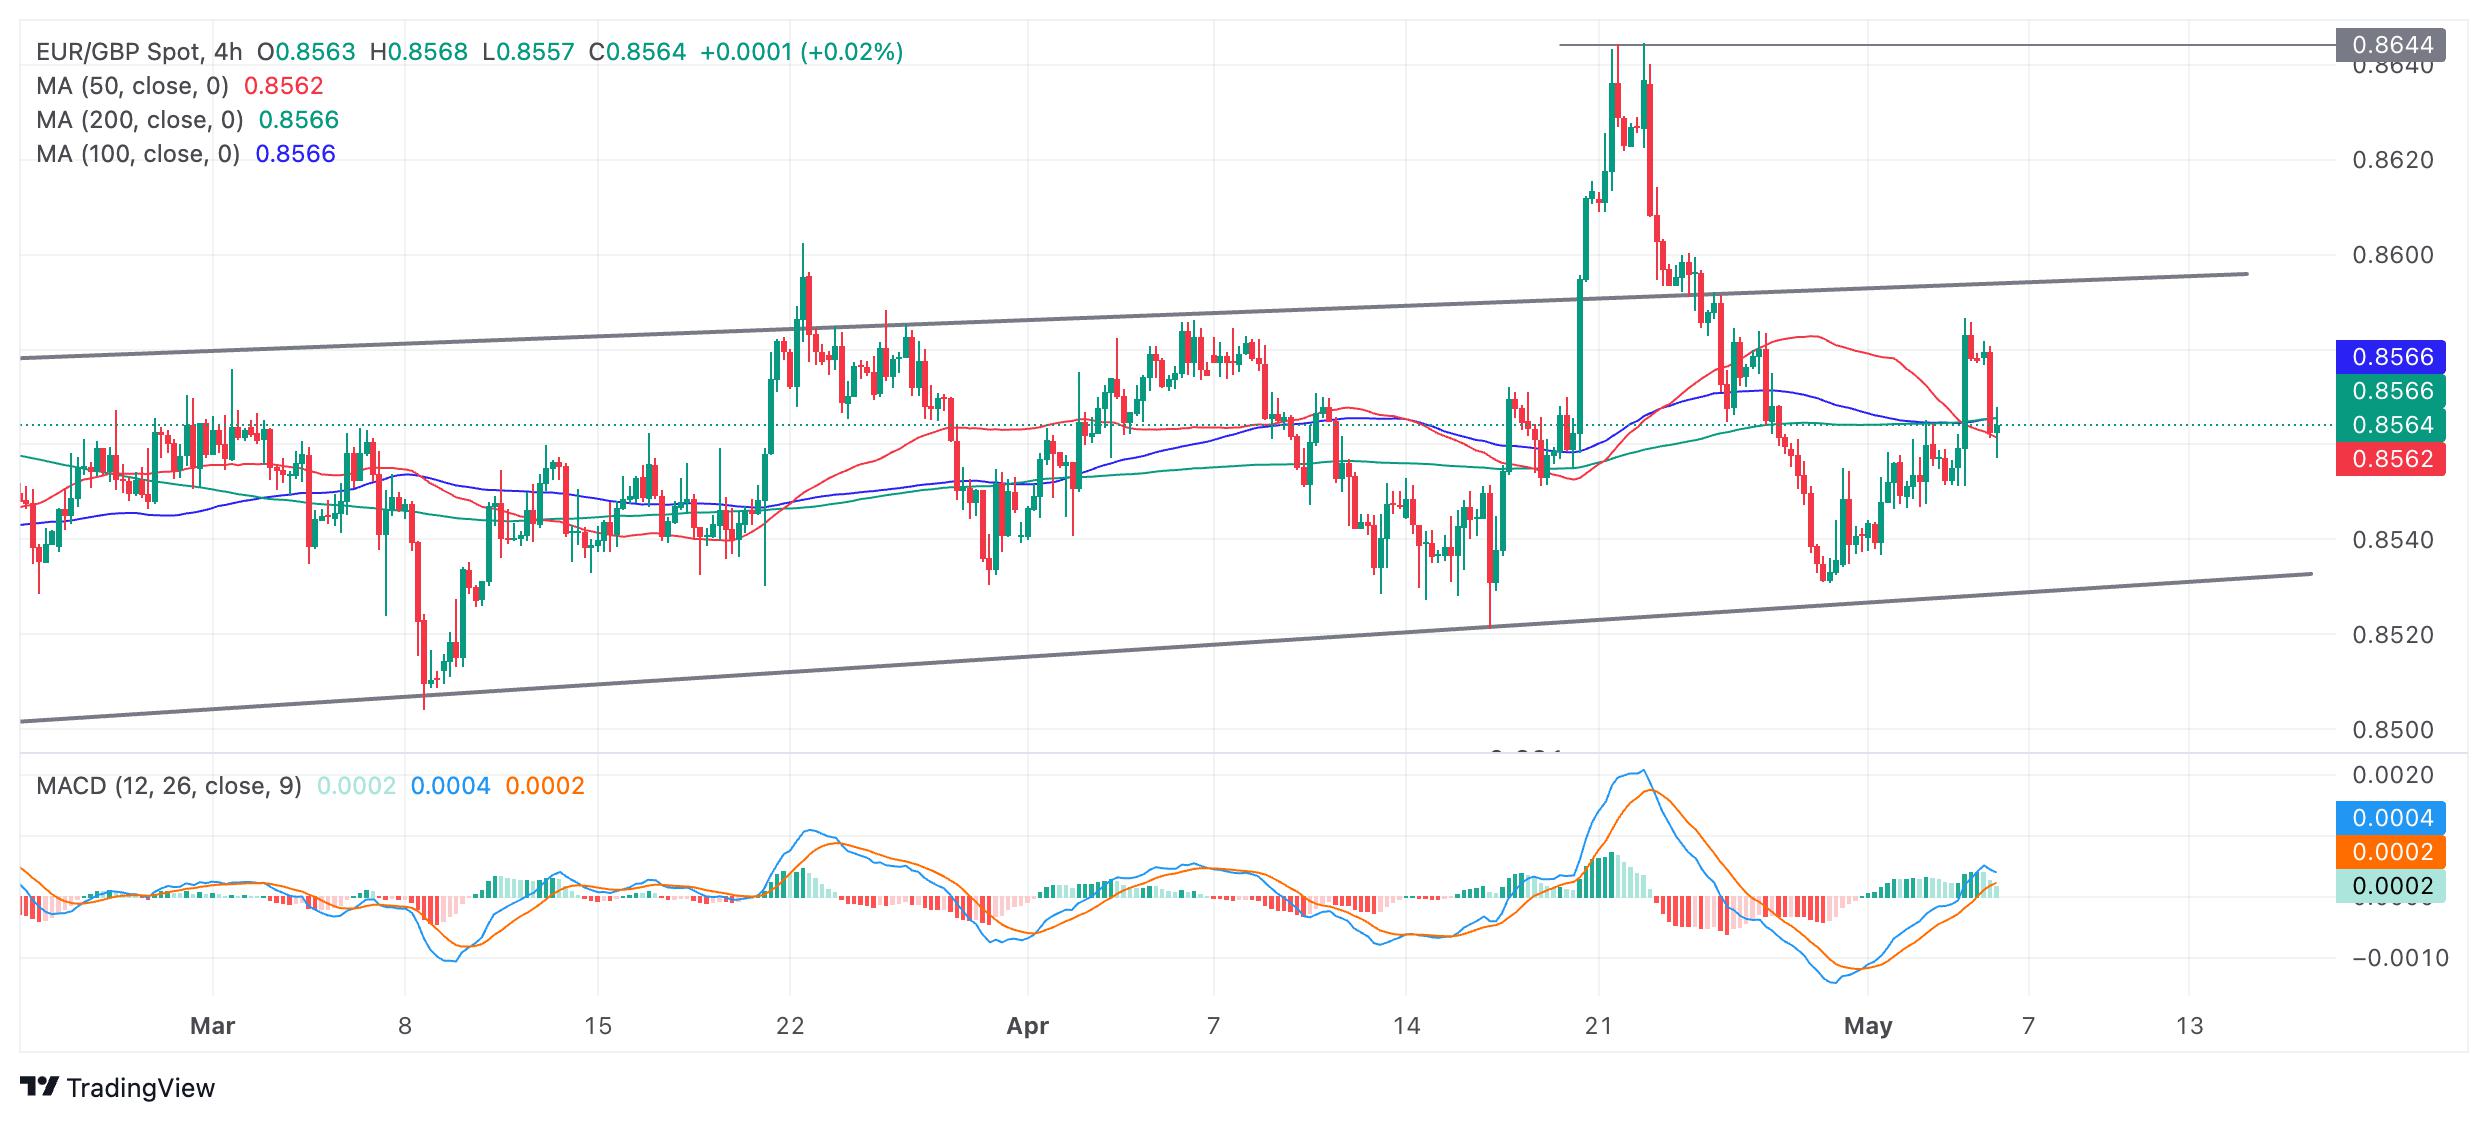 EUR/GBP Price Analysis: Continues oscillating within a range – currently falling